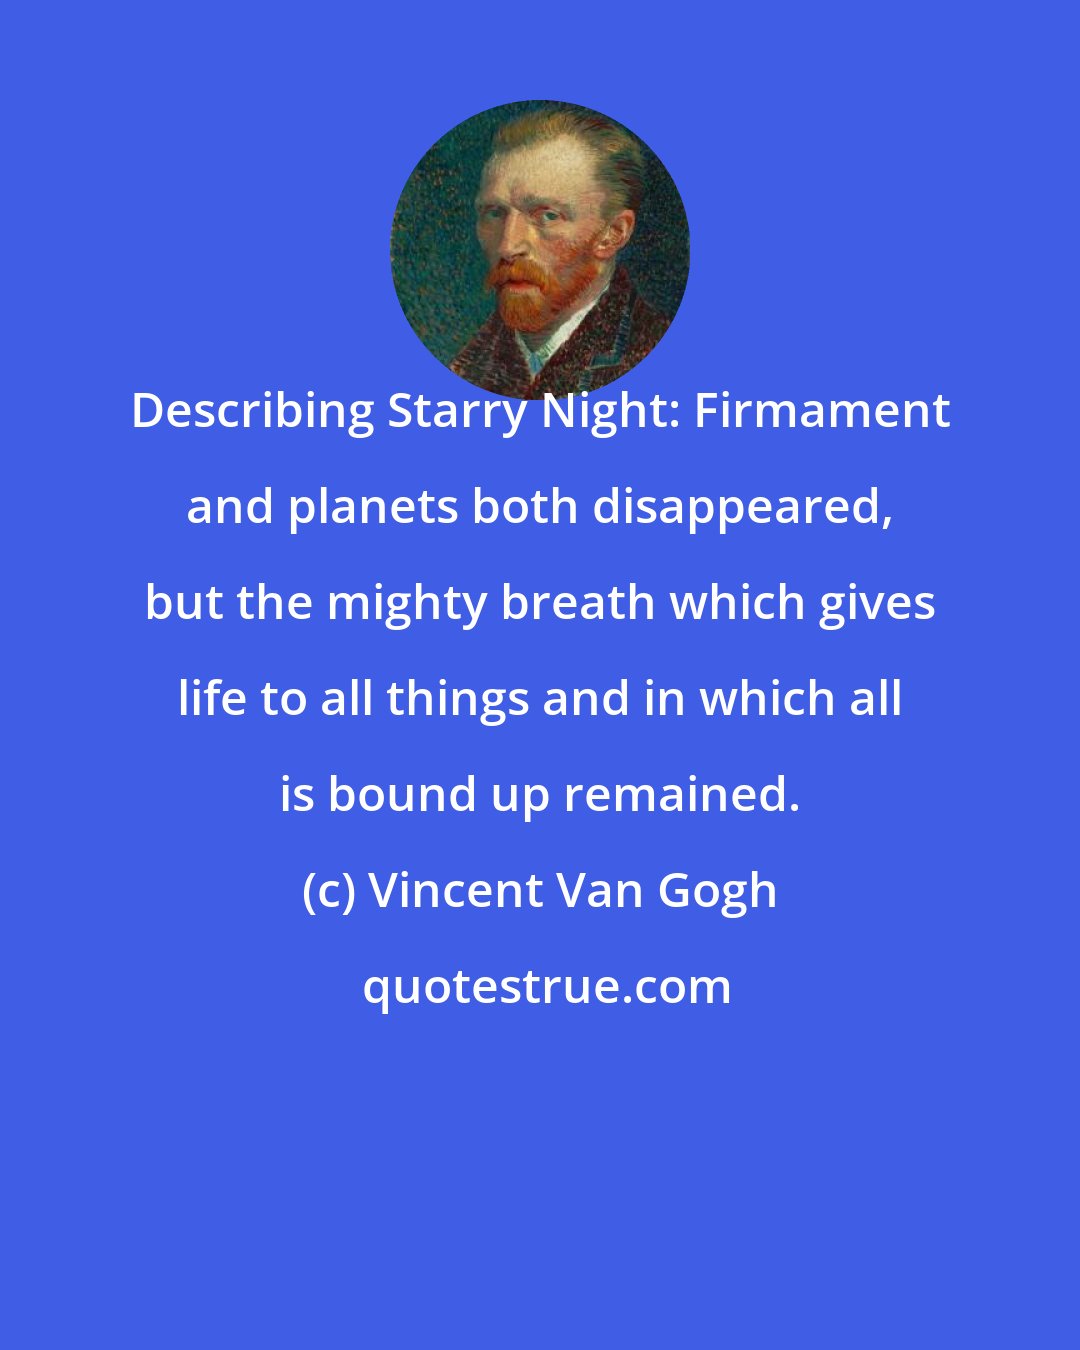 Vincent Van Gogh: Describing Starry Night: Firmament and planets both disappeared, but the mighty breath which gives life to all things and in which all is bound up remained.